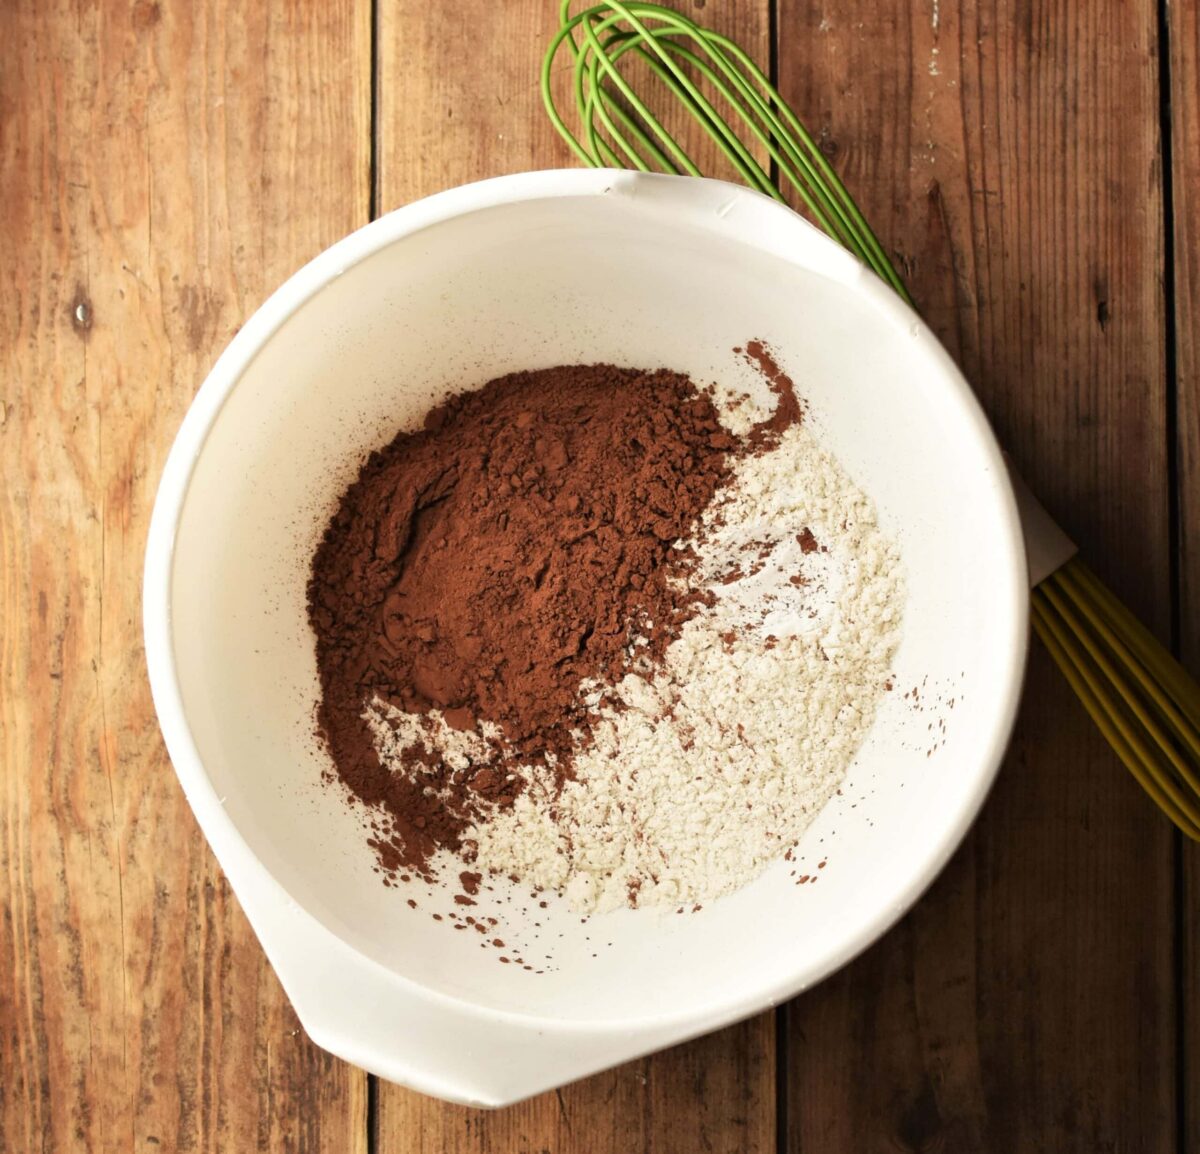 Flour and cocoa powder in large white bowl with green whisk.